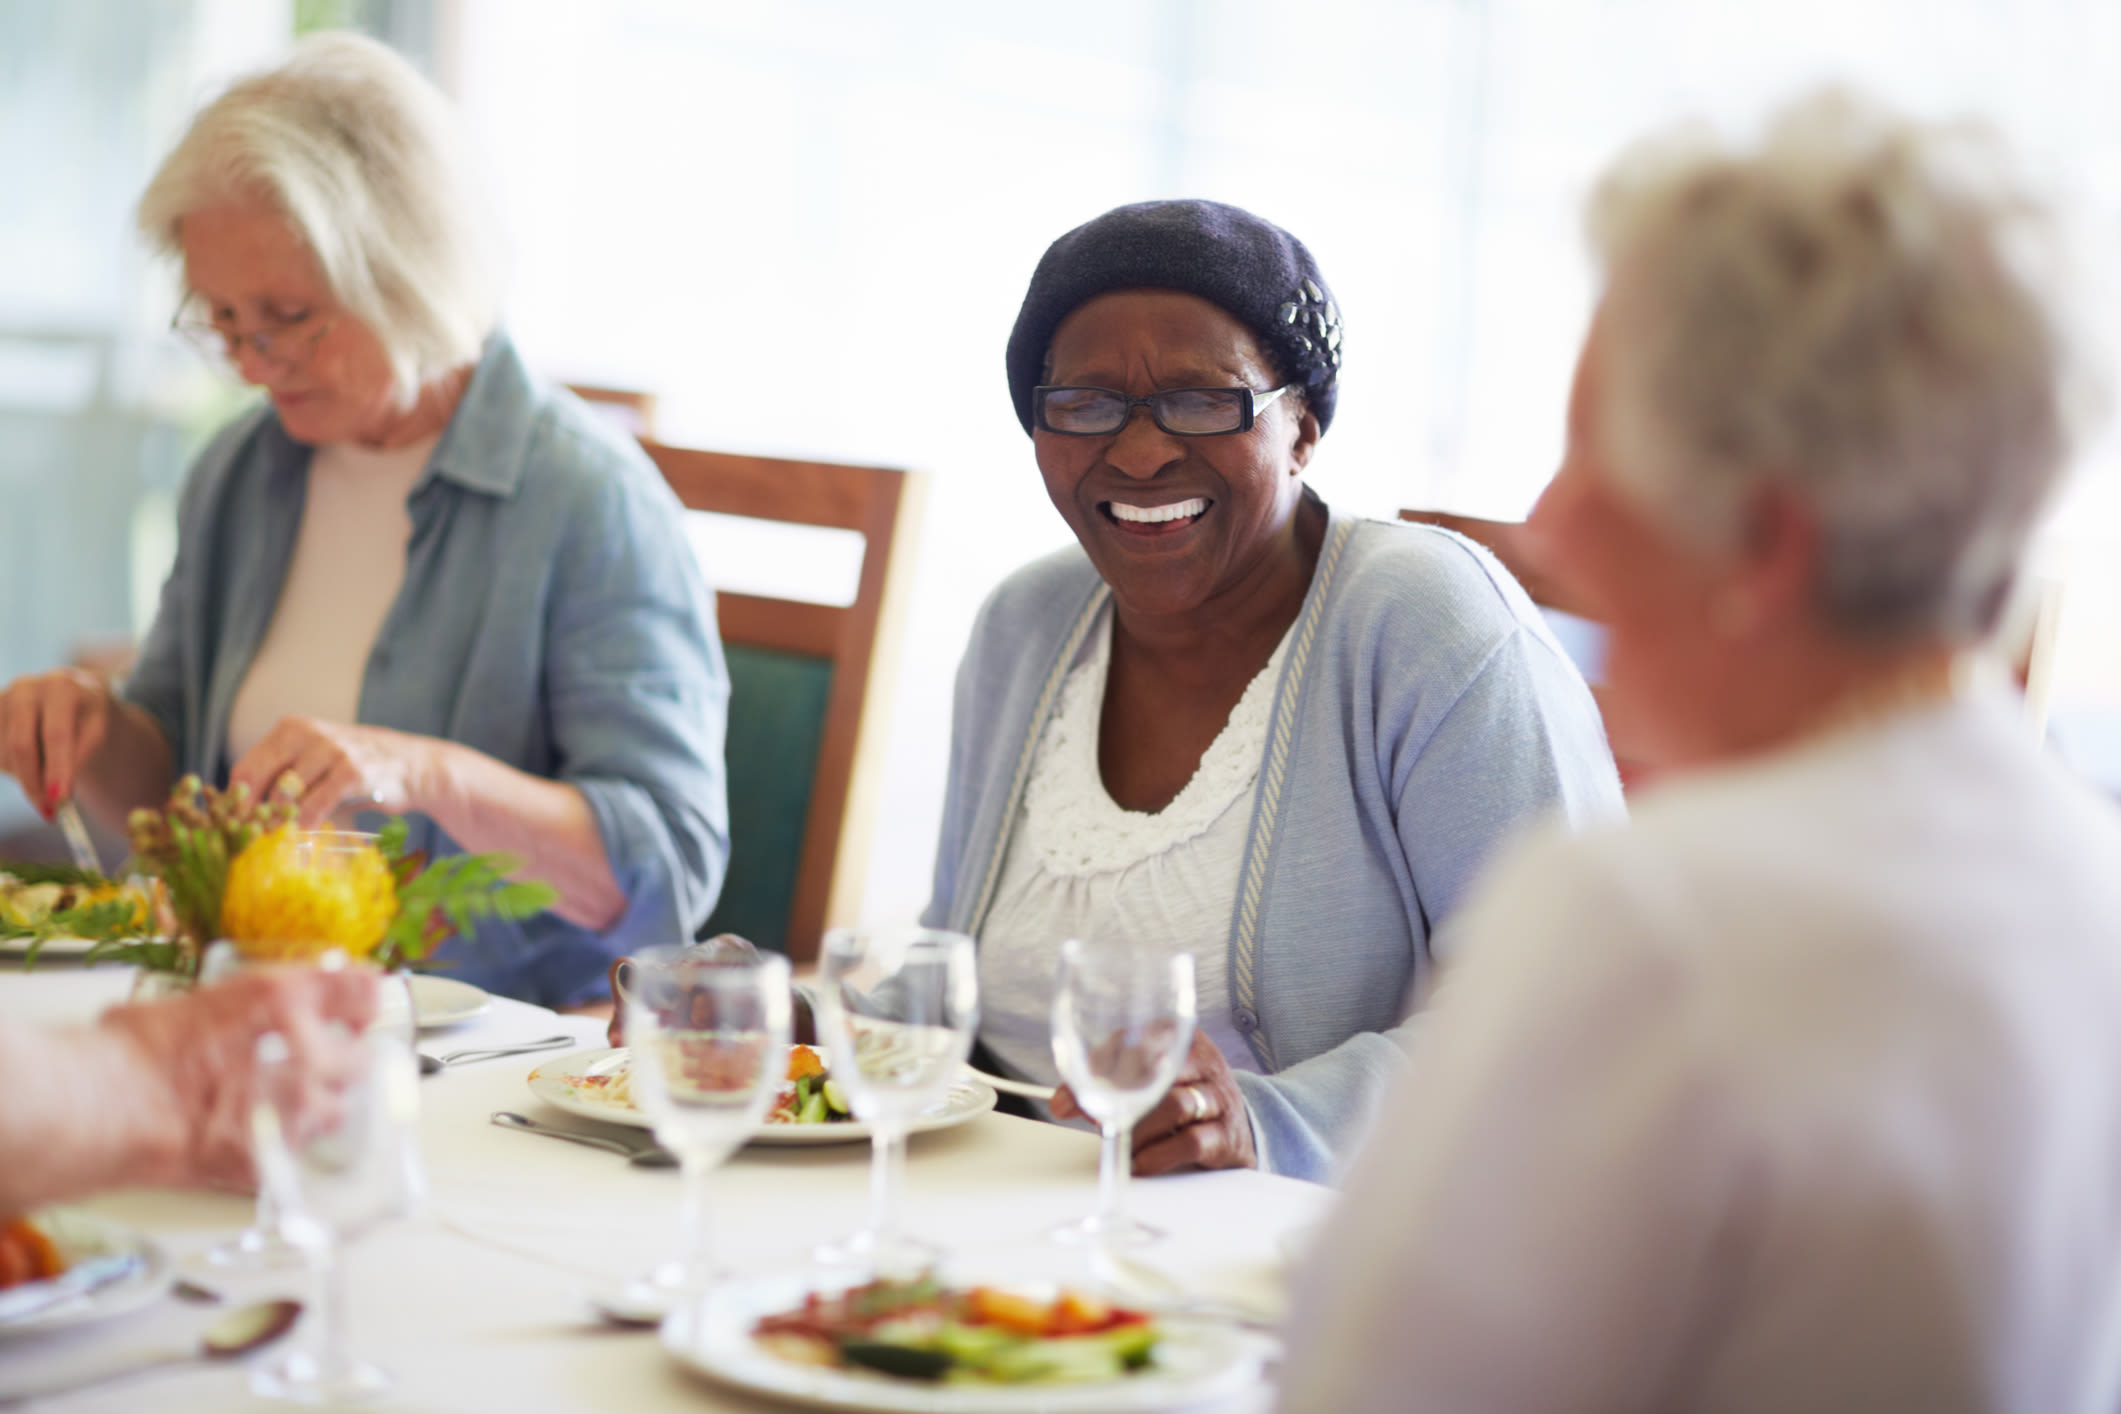 Residents gathered for lunch at English Meadows Kathwood Campus in Columbia, South Carolina